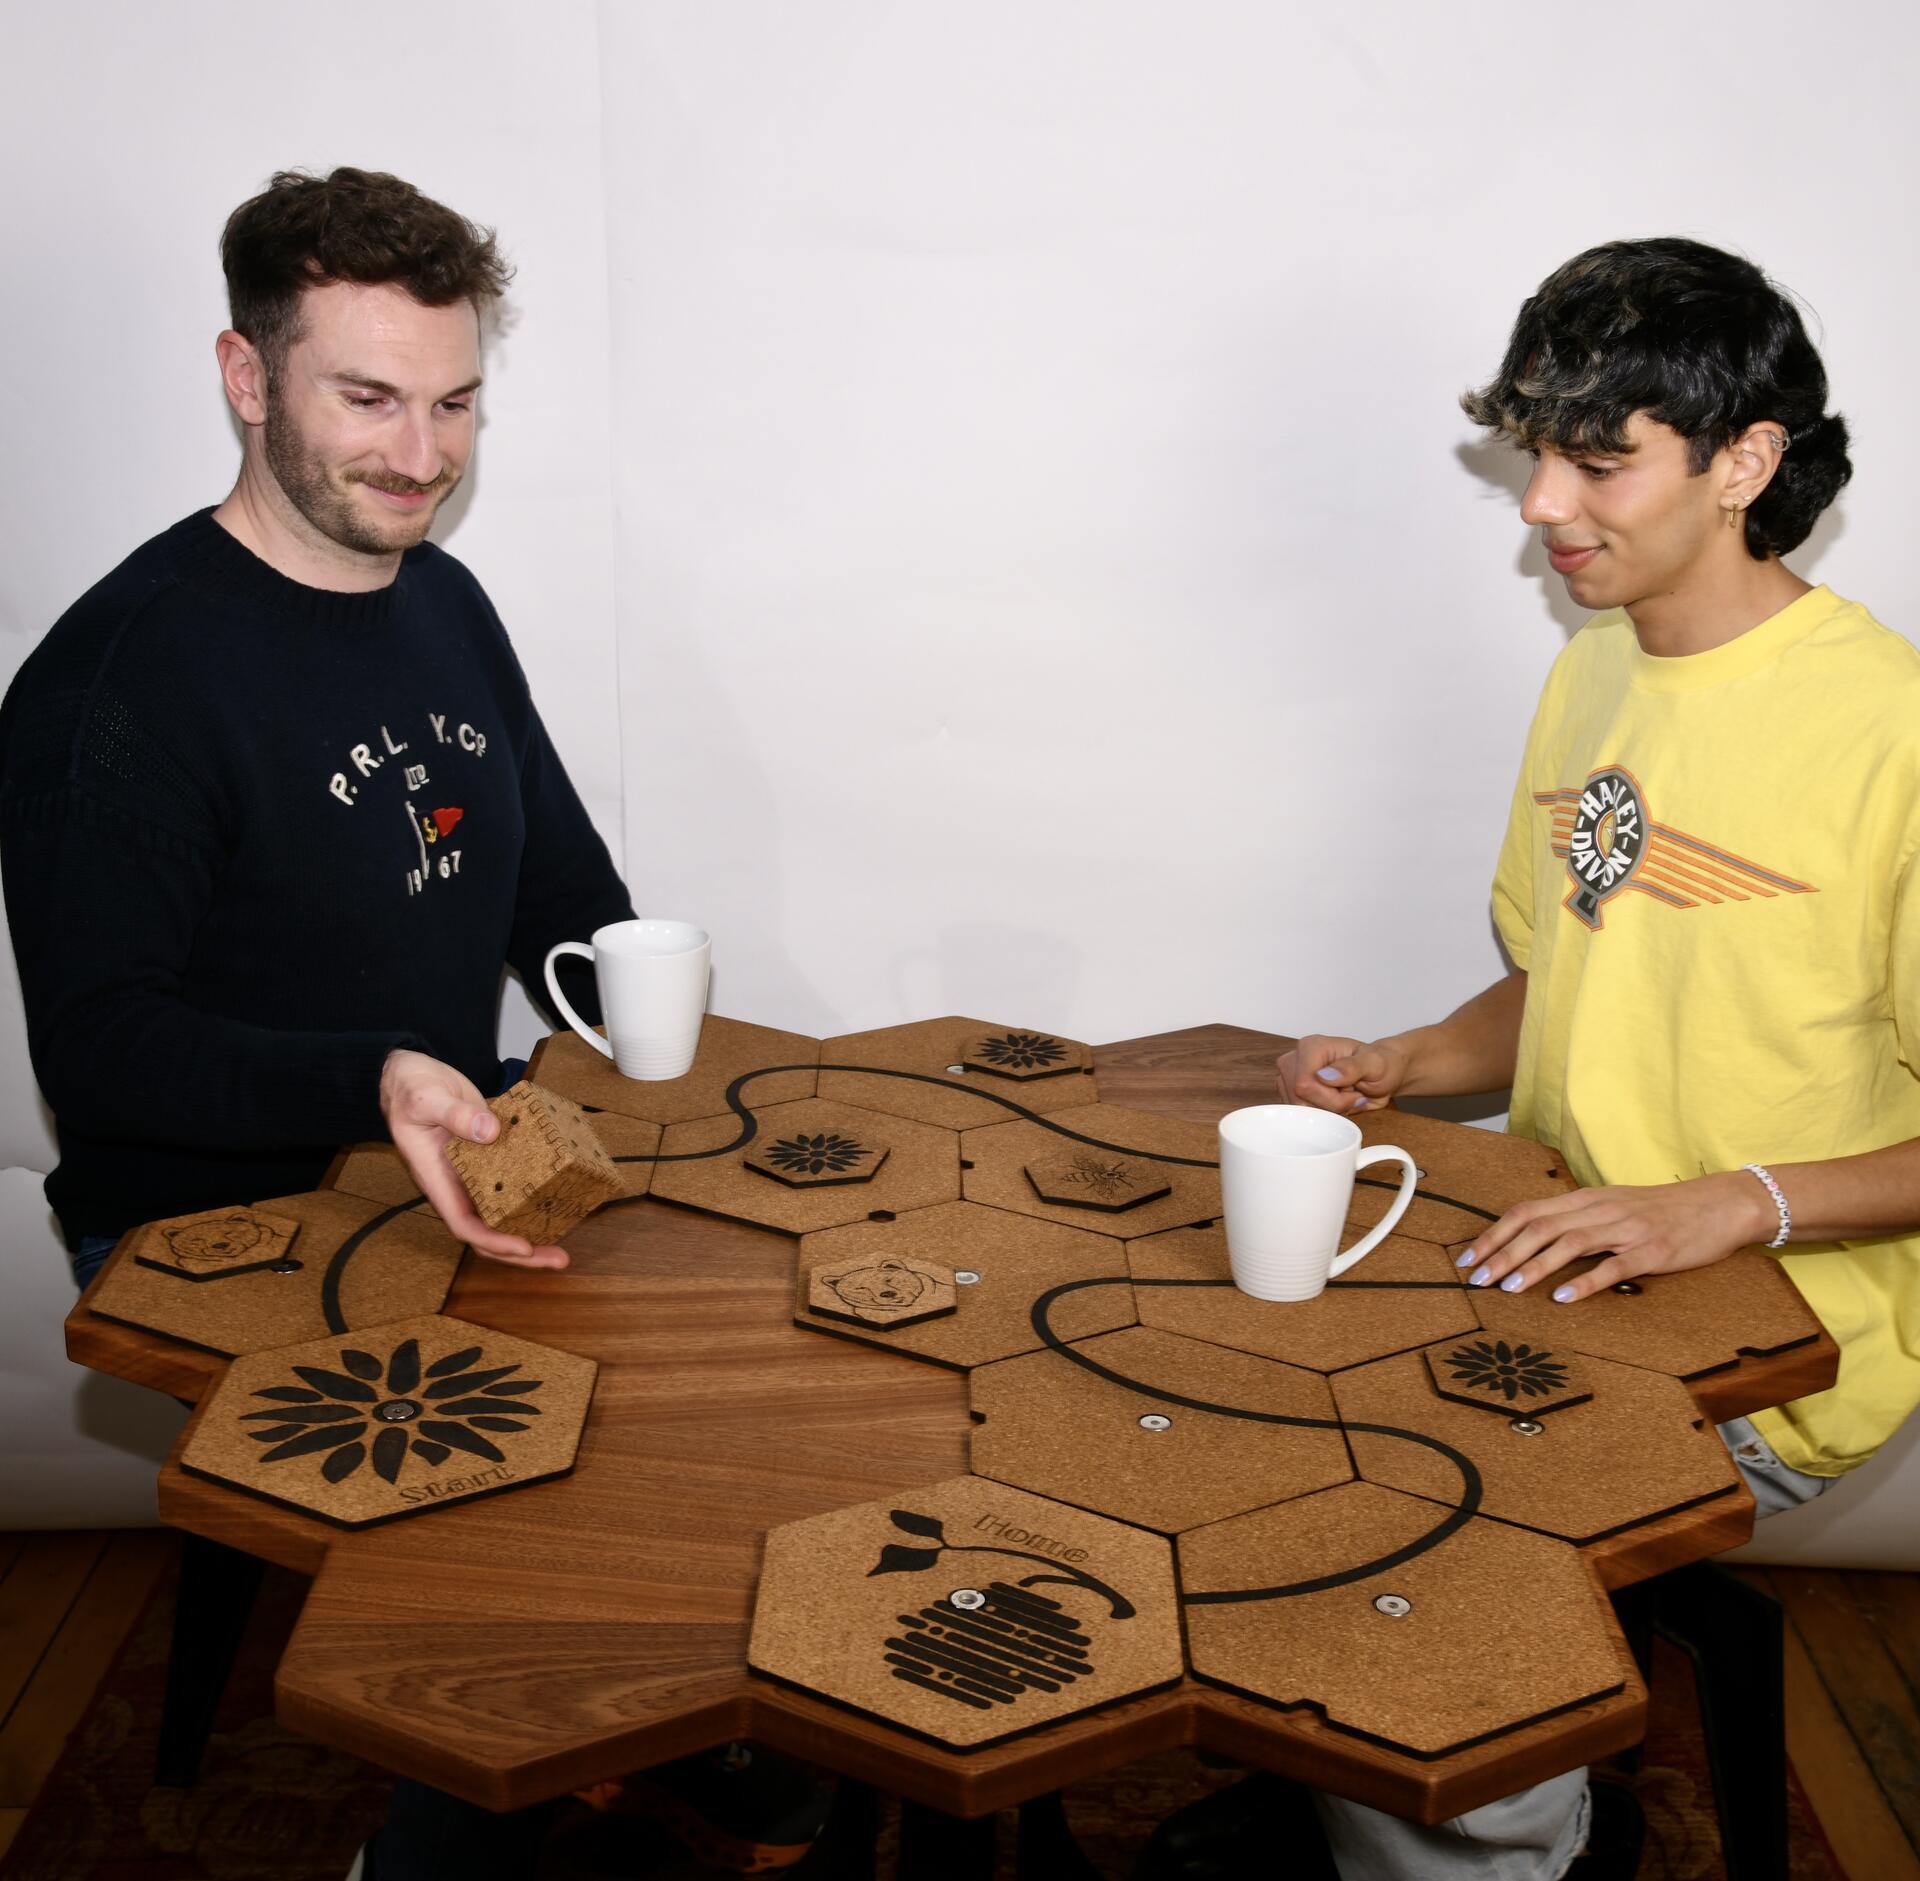 Two people, playing a game on the table, sapele table, honeycomb table, sitting together, one person moving cork tile, a white mug sitting on the table top